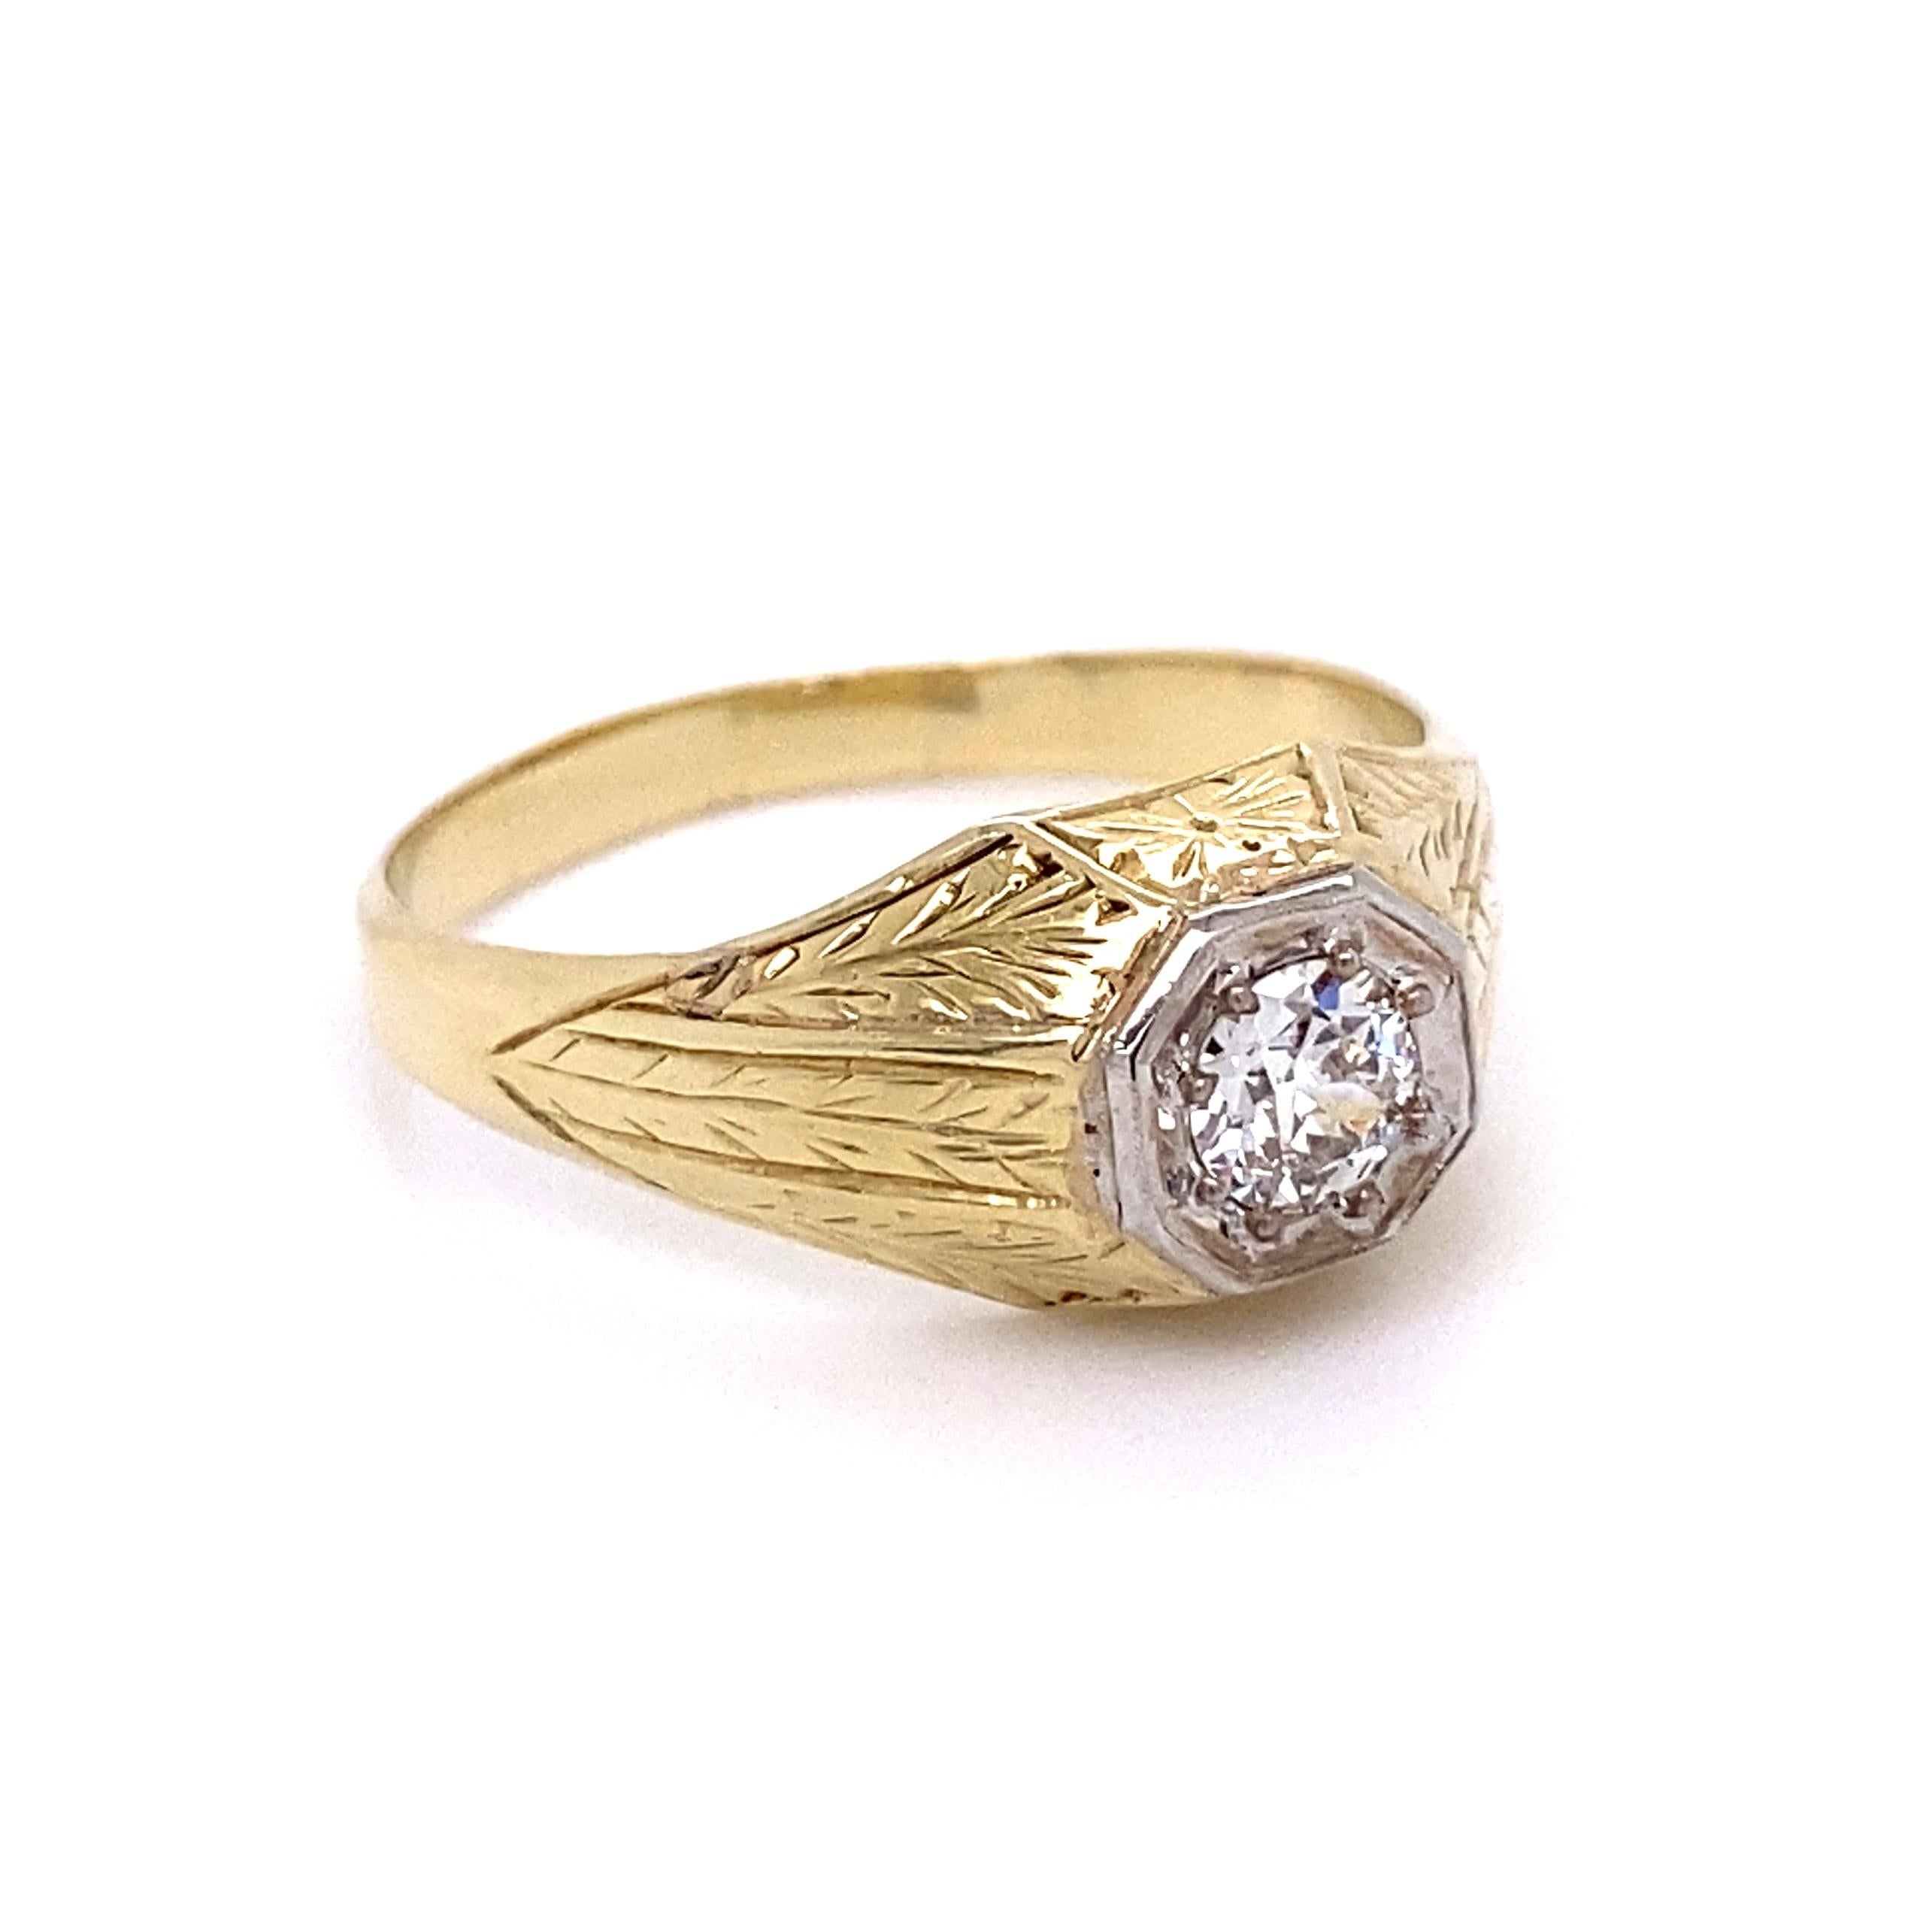 Handsome Gent’s Old European cut Solitaire Diamond Ring. Center securely Hand set with a 0.40 Carat Old European cut Diamond.  Ring size 10.75, we offer ring resizing. Hand crafted engraved 14K Yellow Gold mounting. Approx. dimensions: 1.04” l x